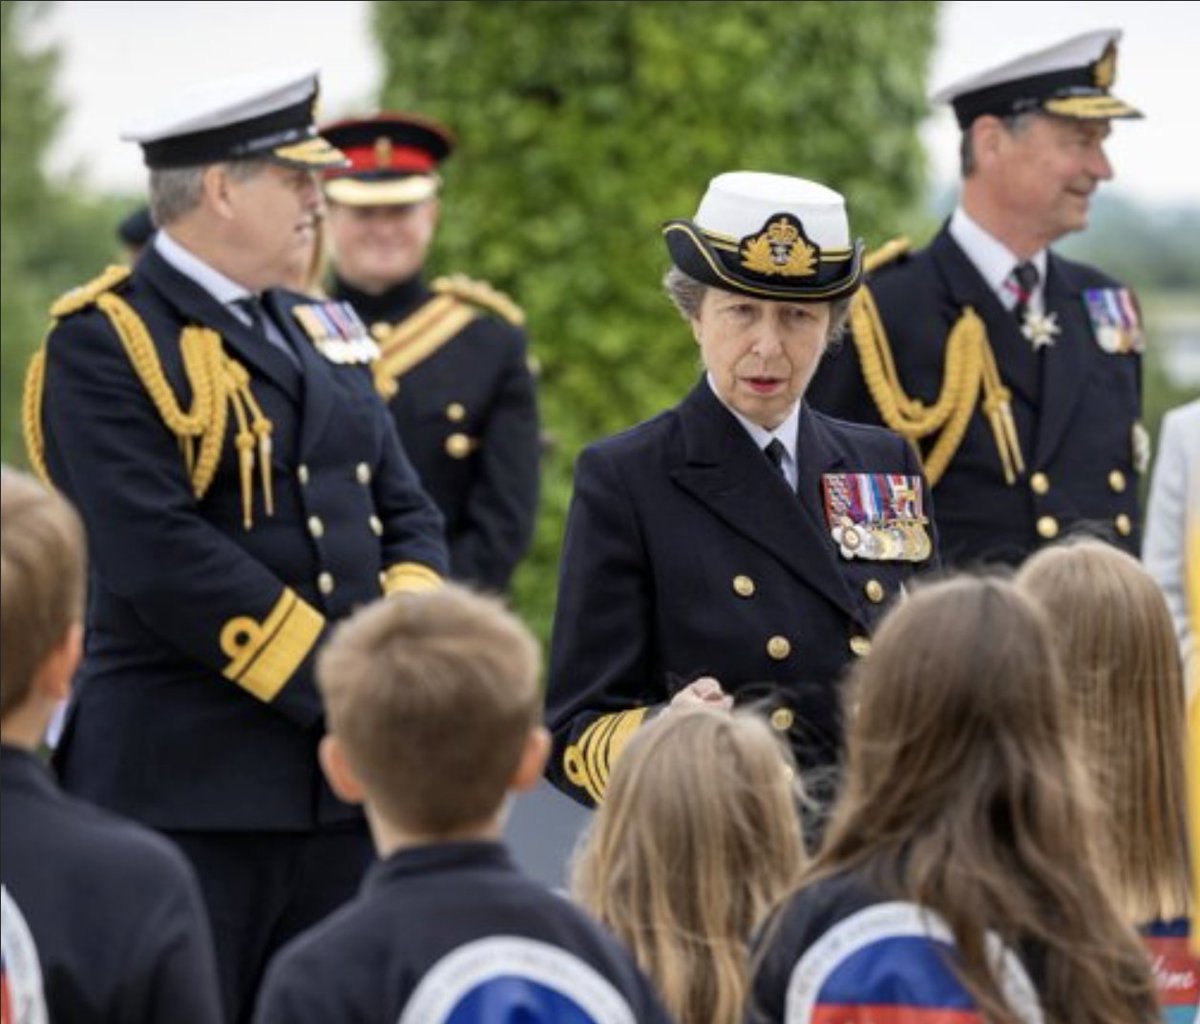 Happy Birthday HRH Princess Anne! Remember when you heard us sing two years ago at the @Nat_Mem_Arb for #ArmedForcesDay?...Imagine our beautiful voices singing 🎶Happy Birthday🎶 for you today! 🎂